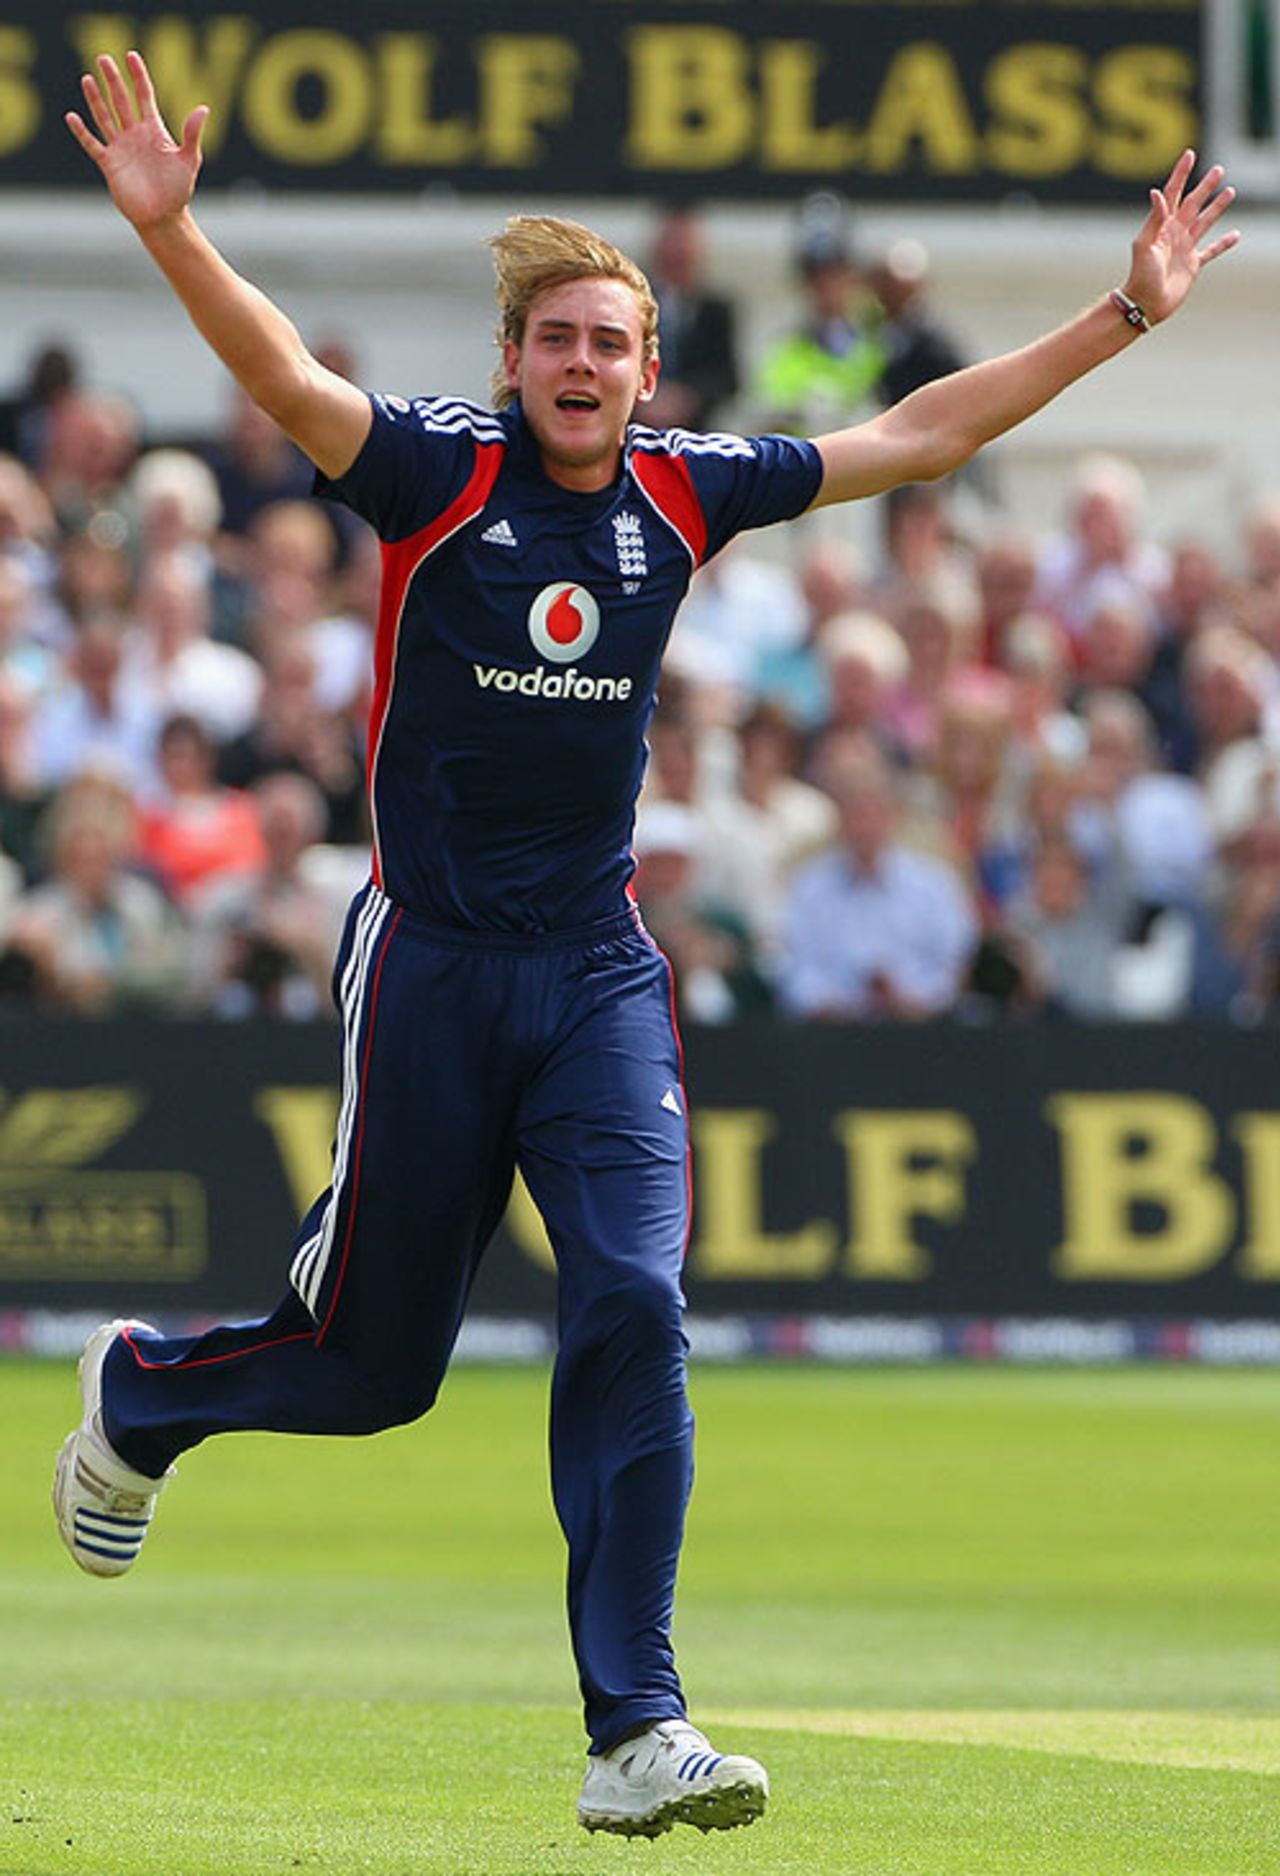 Stuart Broad celebrates another early wicket at Trent Bridge, England v South Africa, 2nd ODI, Trent Bridge, August 26, 2008